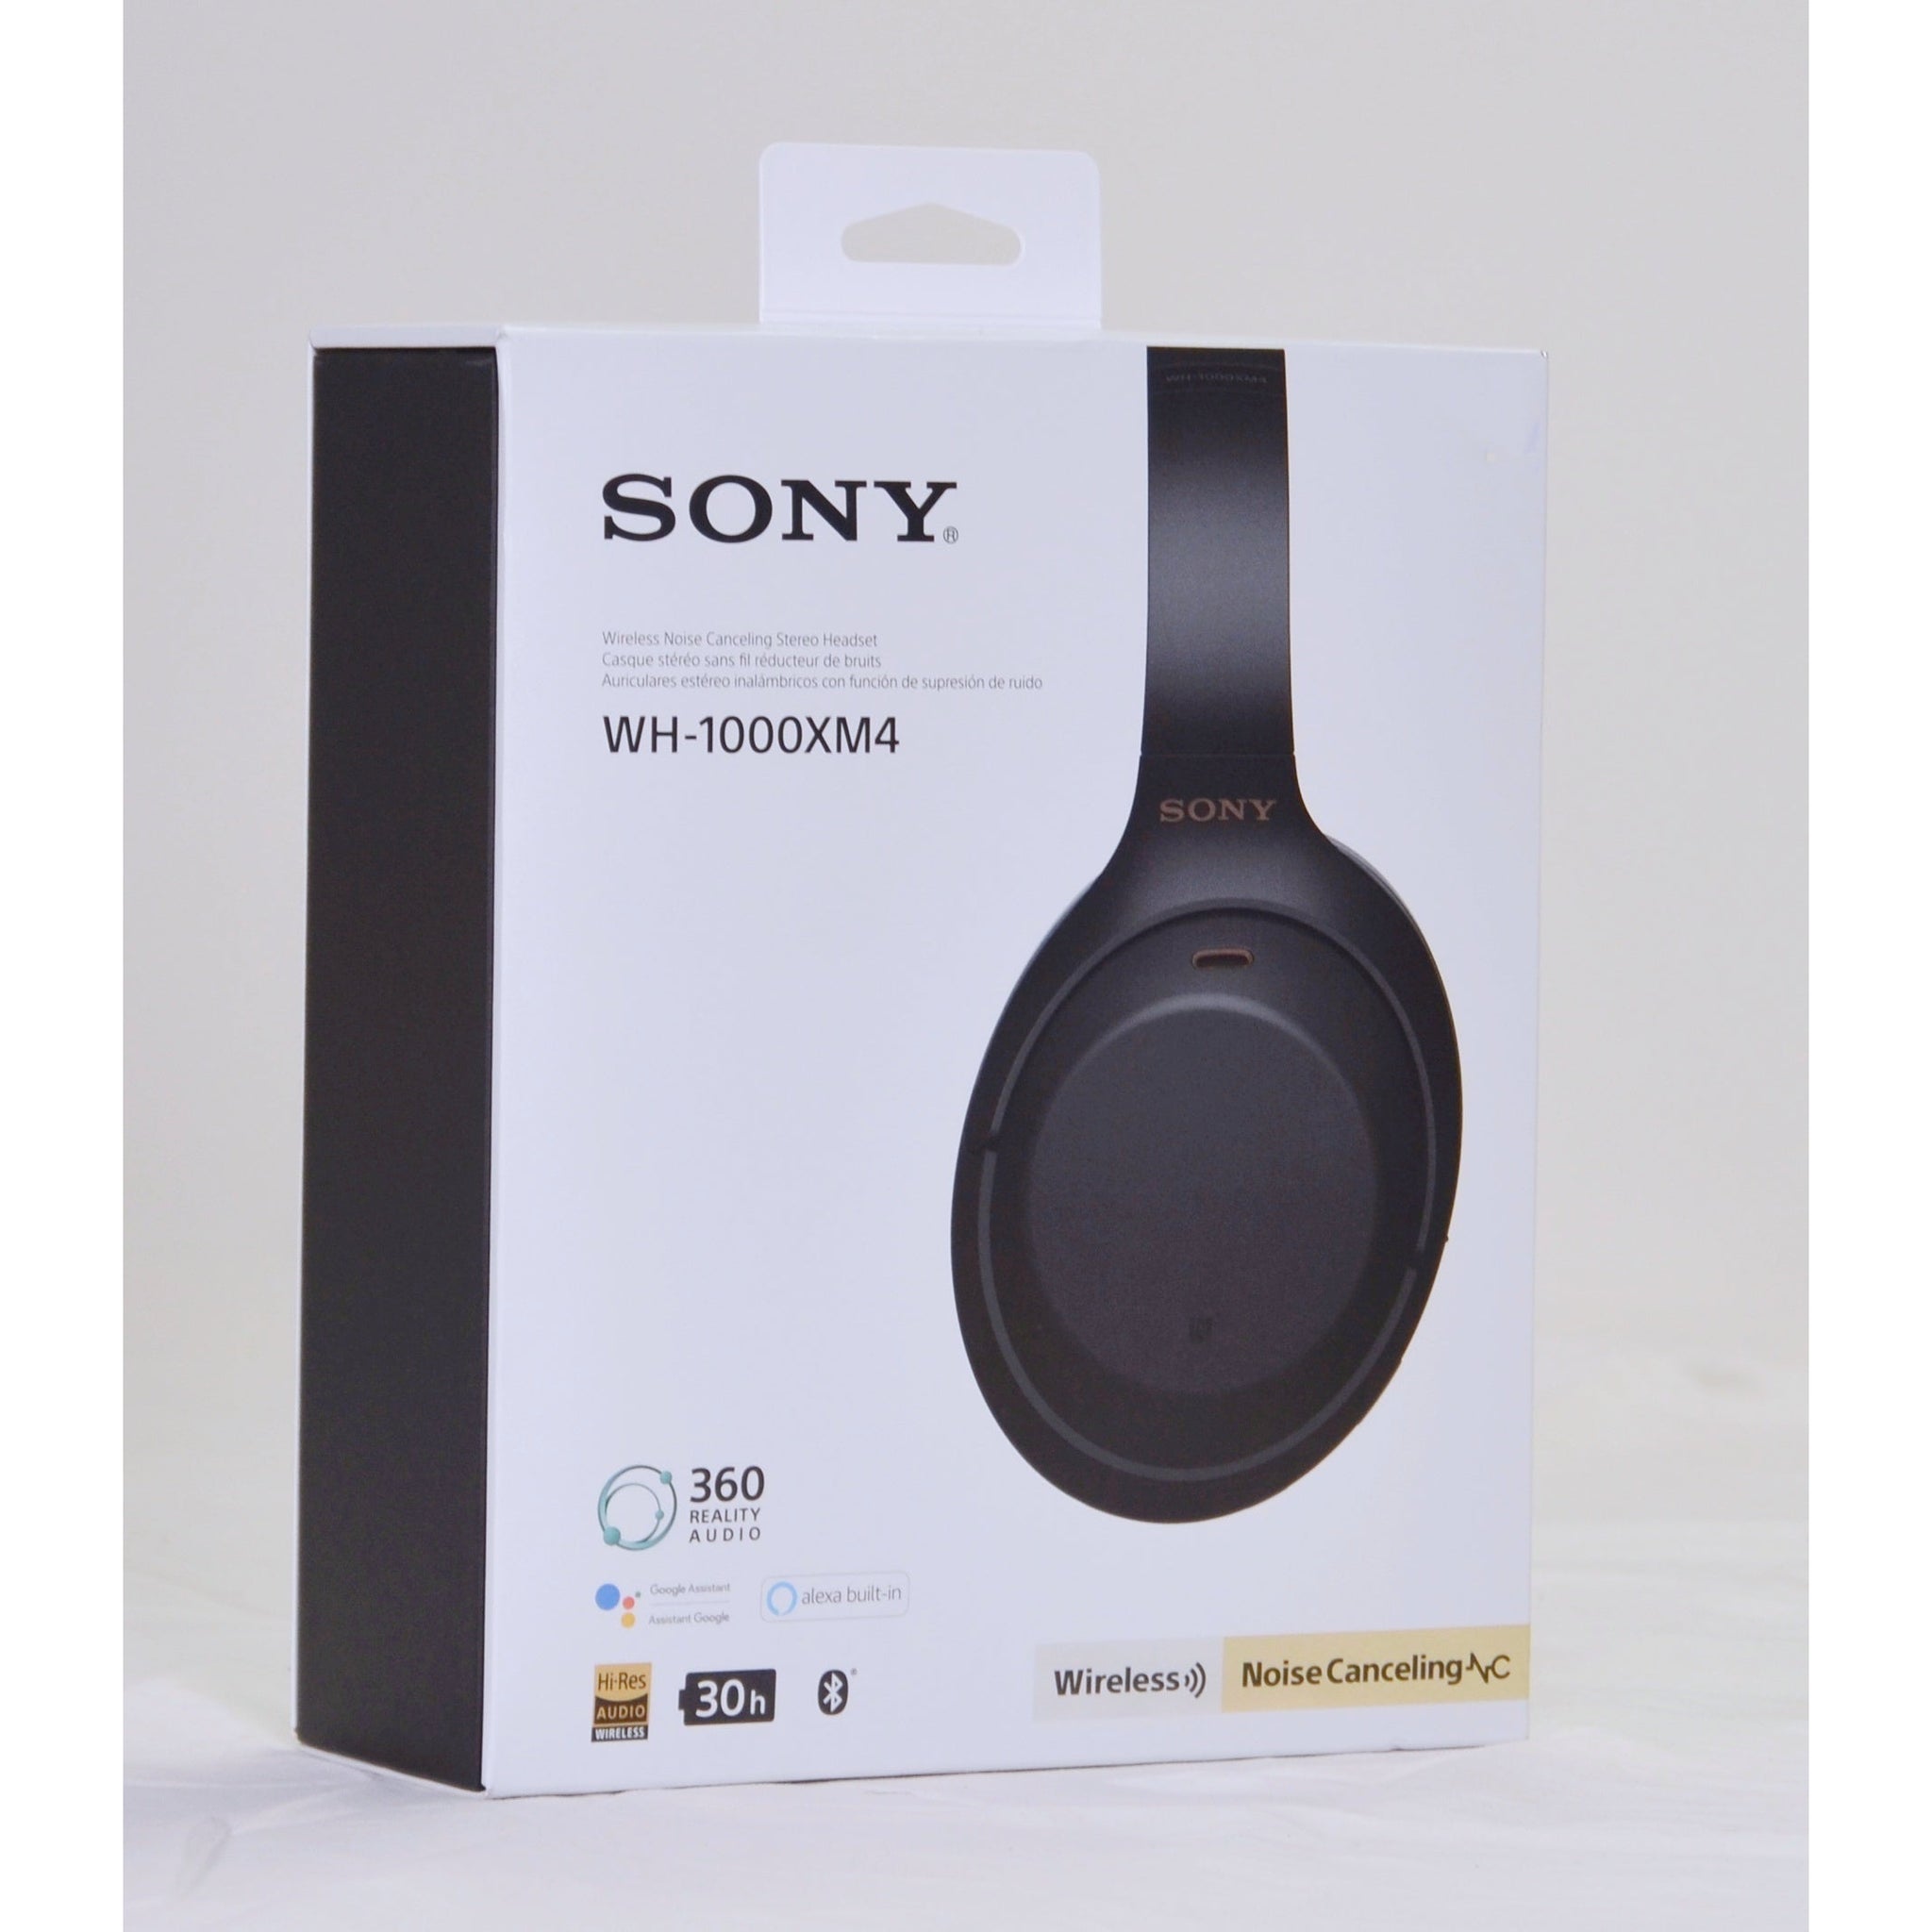 Sony Wireless Noise Cancelling Stereo Headset WH-1000XM4 - Matte